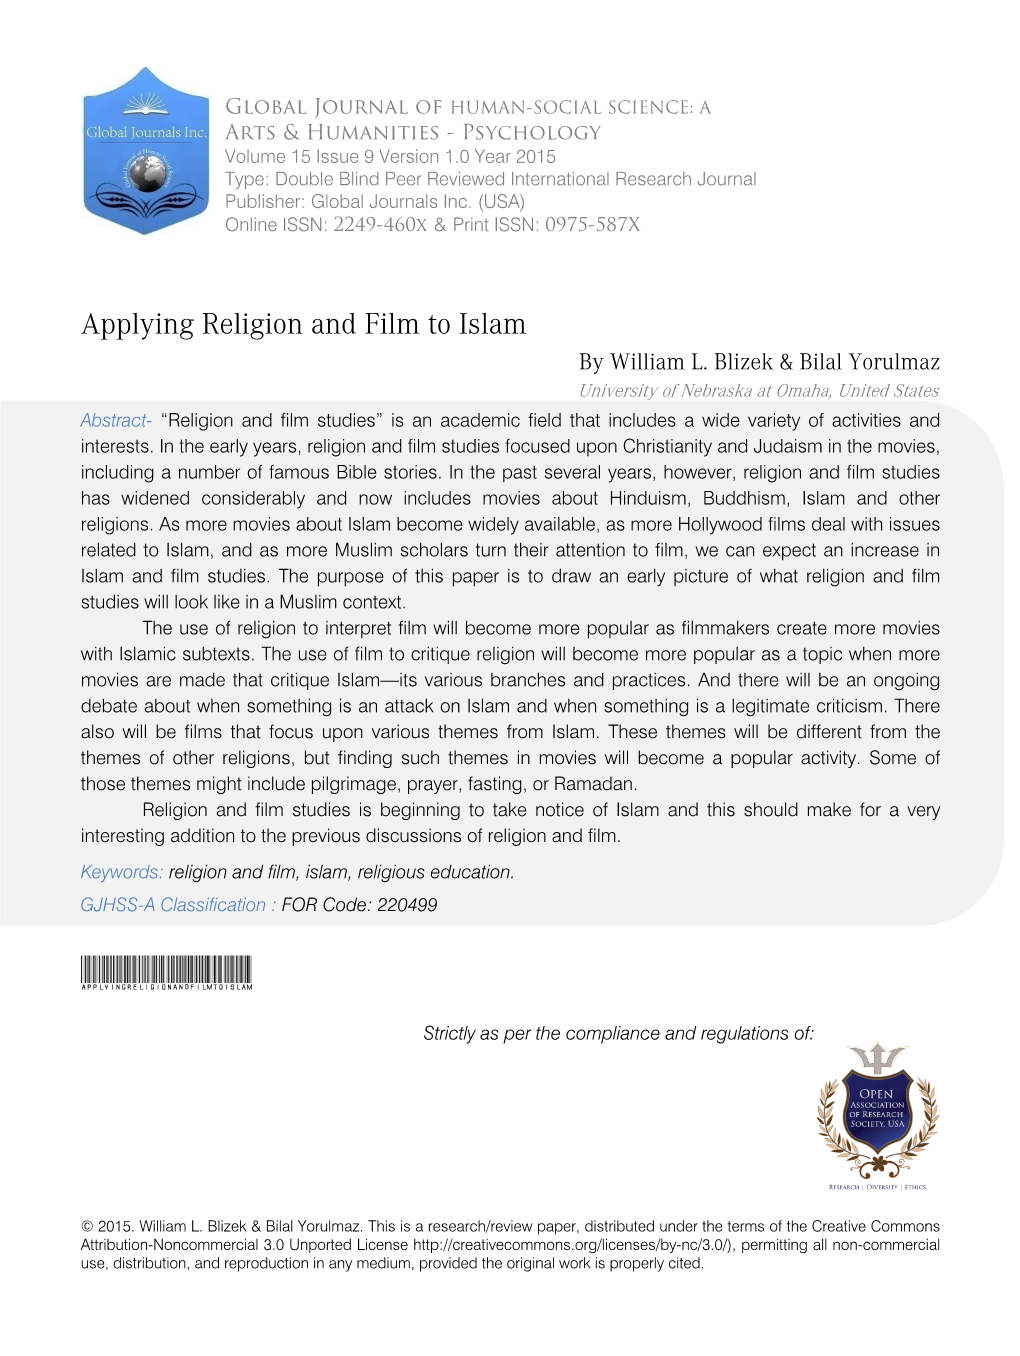 Applying Religion and Film to Islam by William L